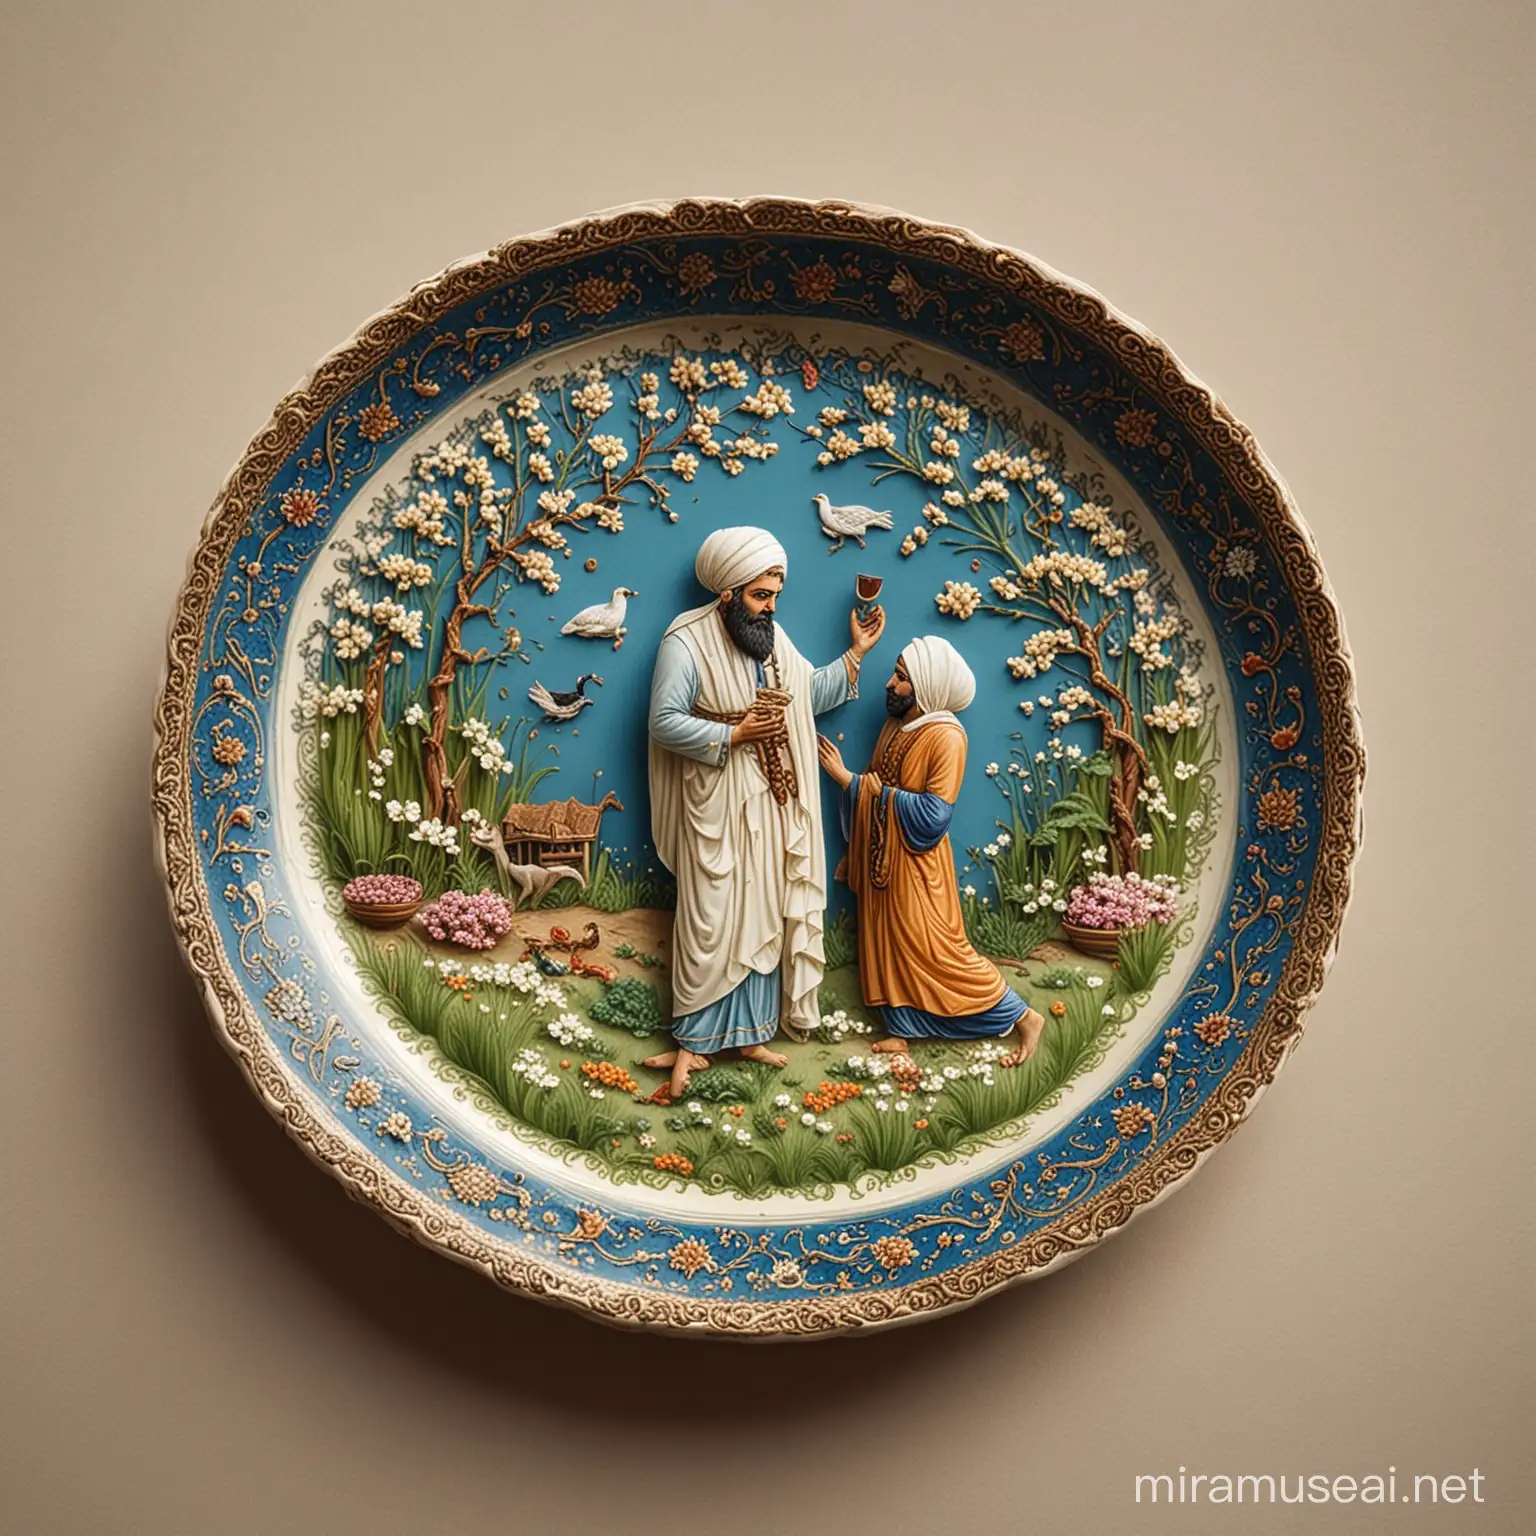 Iranian Myth Depicted in Miniature Design with Plate of Rice